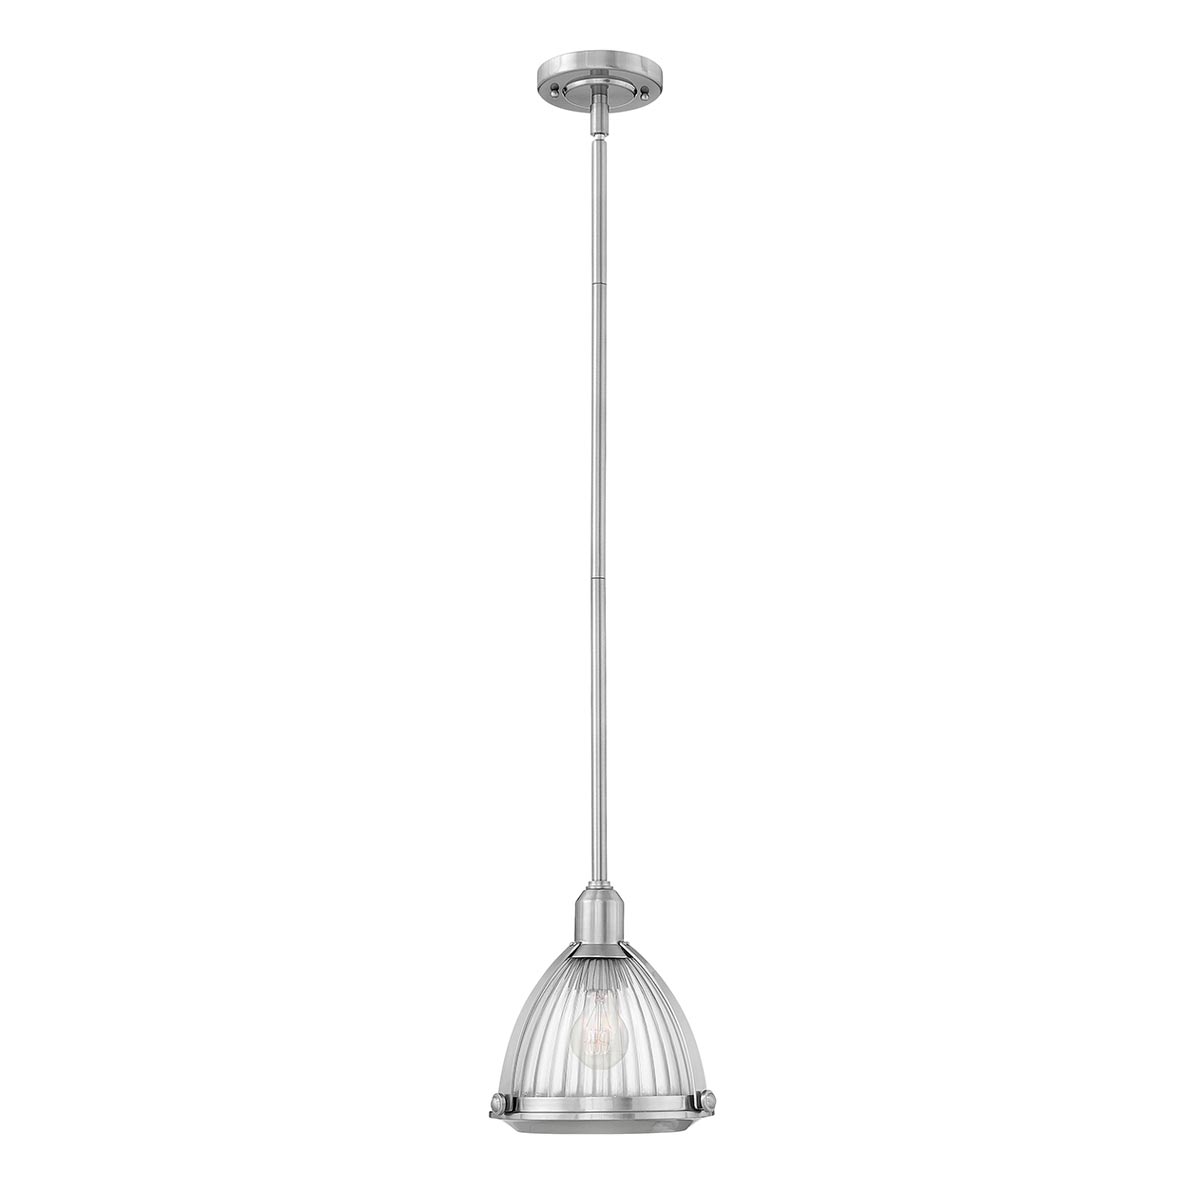 Elroy Brushed Nickel 1 Lamp Pendant Ceiling Light Ribbed Glass Shade